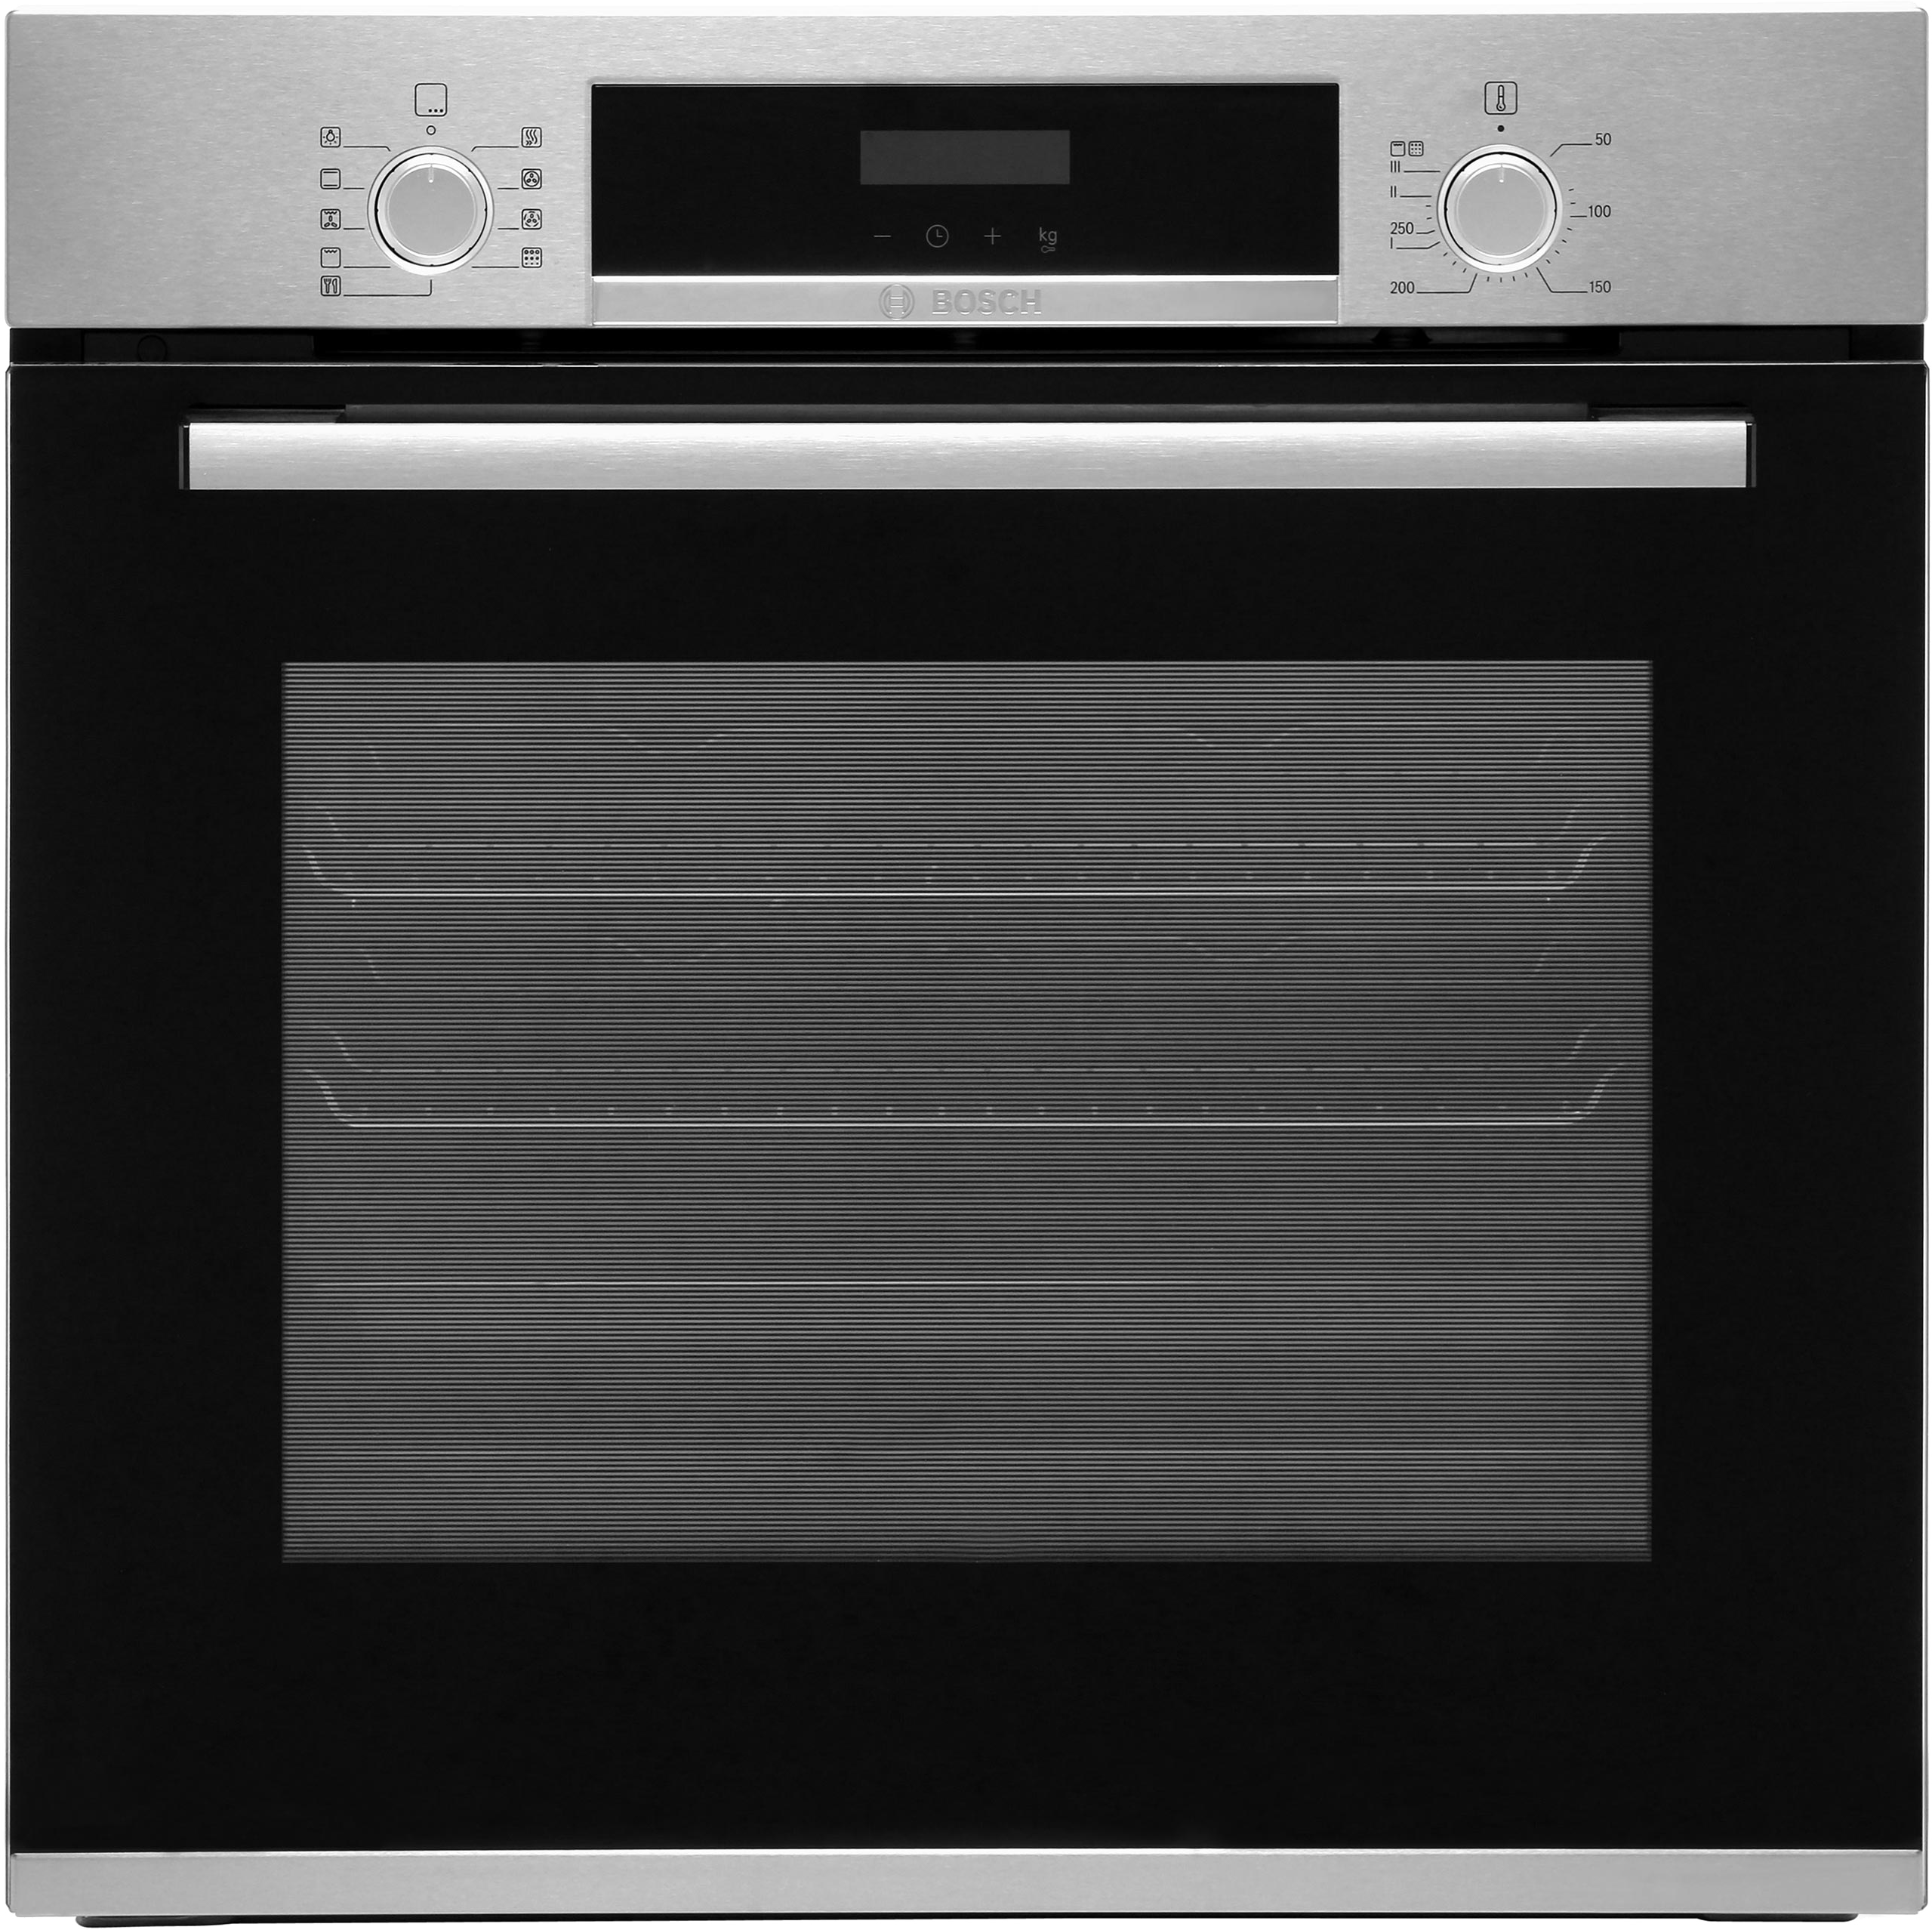 Bosch Series 4 HBS573BS0B Built In Electric Single Oven with Pyrolytic Cleaning - Stainless Steel - A Rated, Stainless Steel